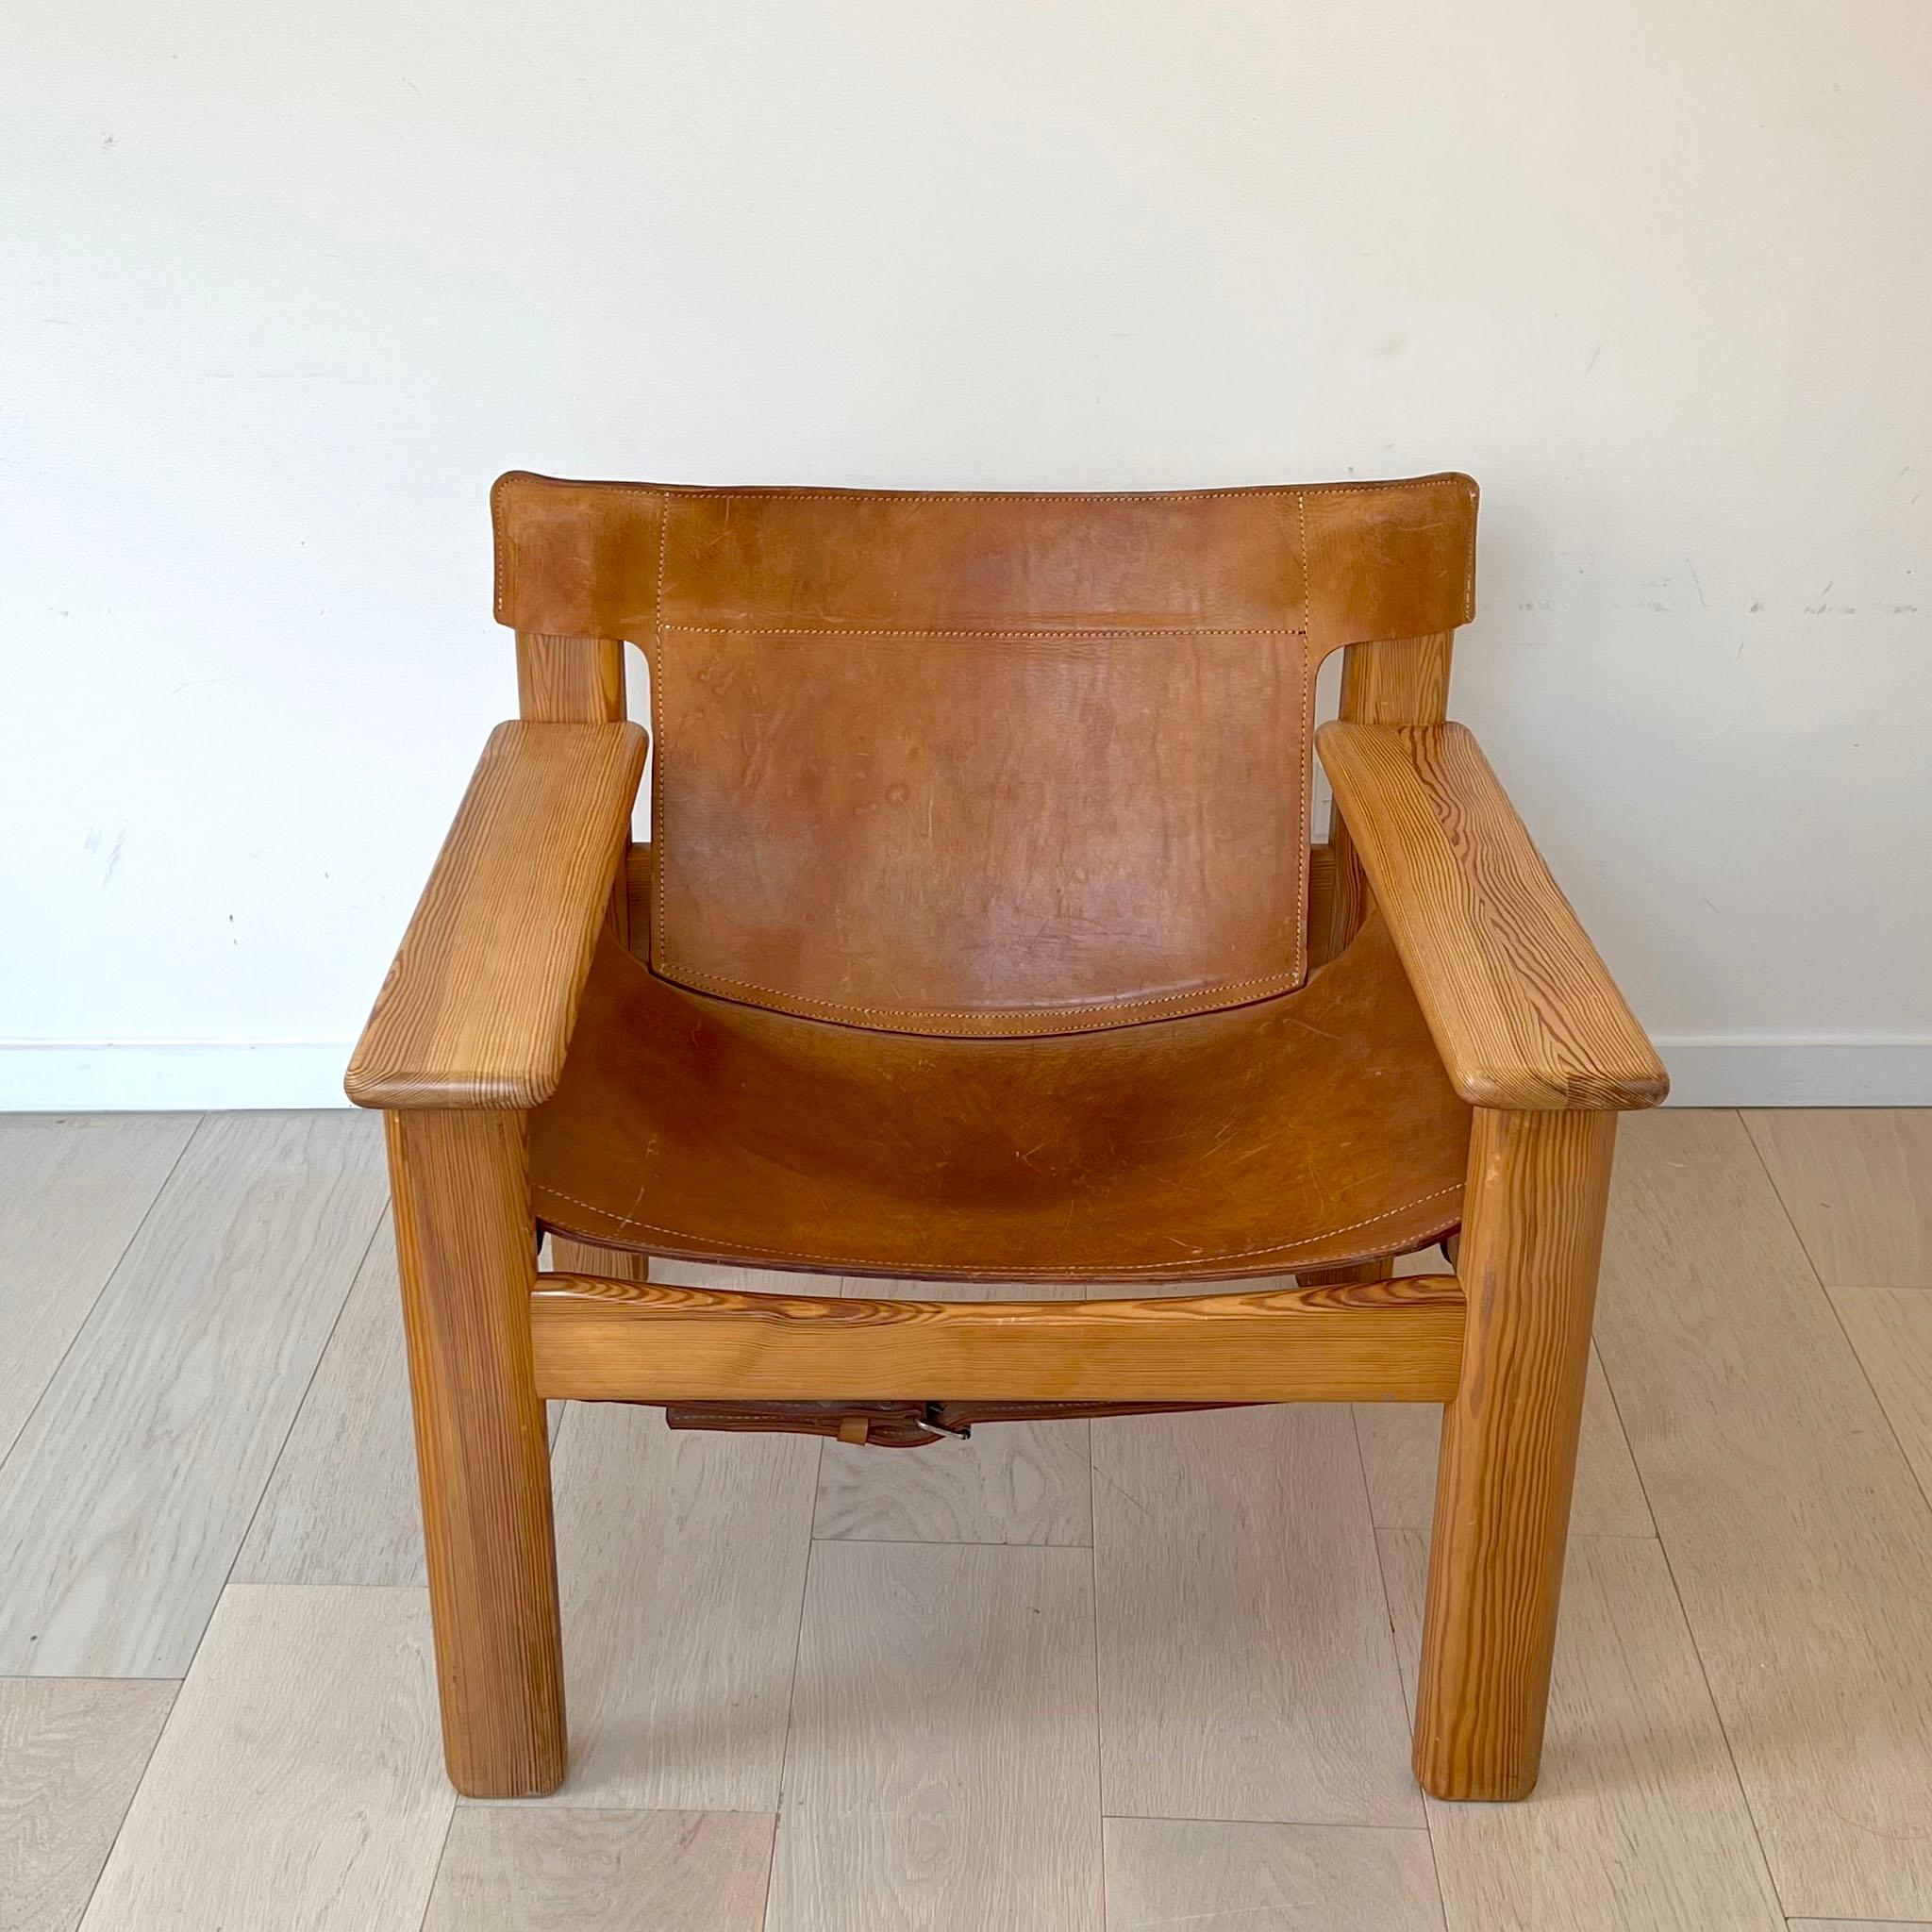 Swedish Designer Karin Mobring designed chair with thick saddle leather seat and pine frame. In the style of Borge Mogsen's well known Spanish Chair of the same era. This collectible chair is sturdy and comfortable. The leather seat has a nice